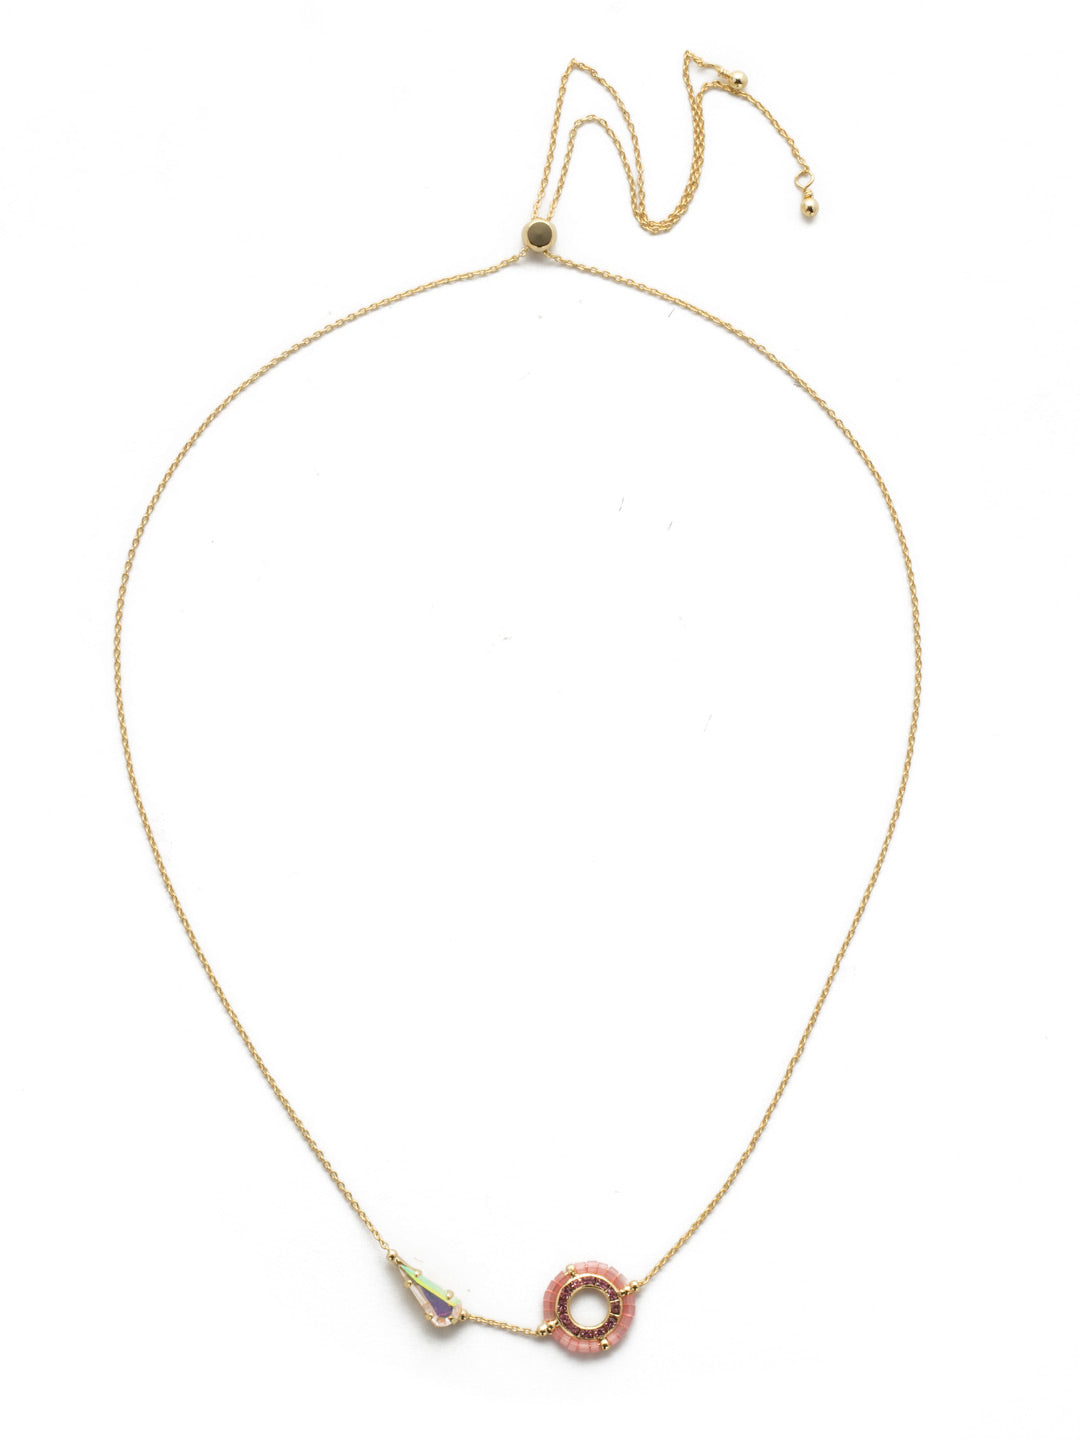 Lyra Pendant Necklace - NEK20BGISS - <p>A delicate airy, architectural gem. Slip on this pendant necklace featuring a navette crystal and delicate beadwork when you're looking for something extra special. From Sorrelli's Island Sun collection in our Bright Gold-tone finish.</p>